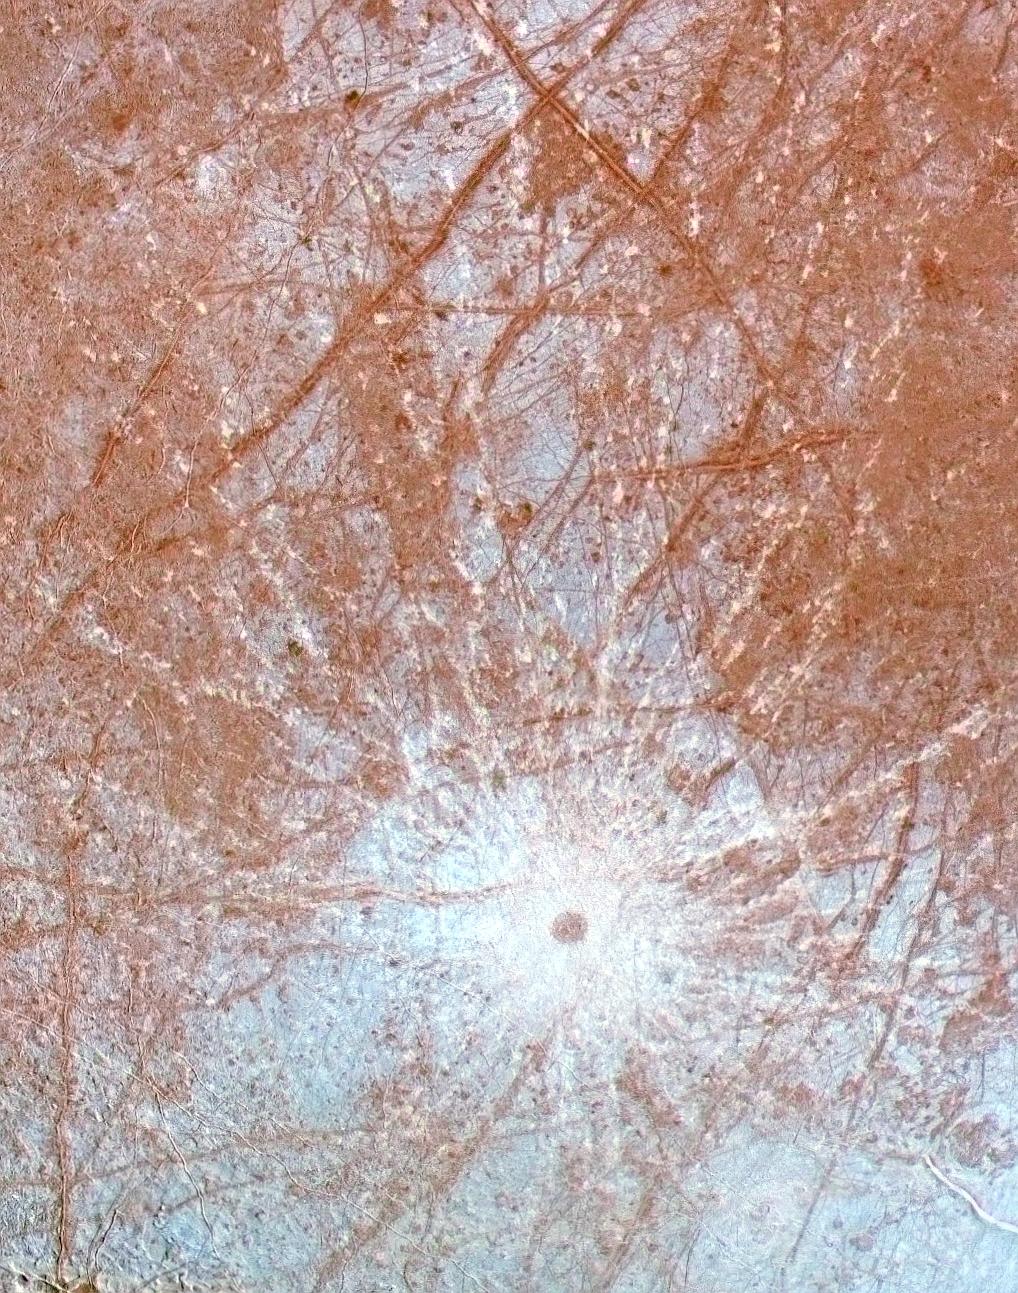 Bright impact crater on Europa